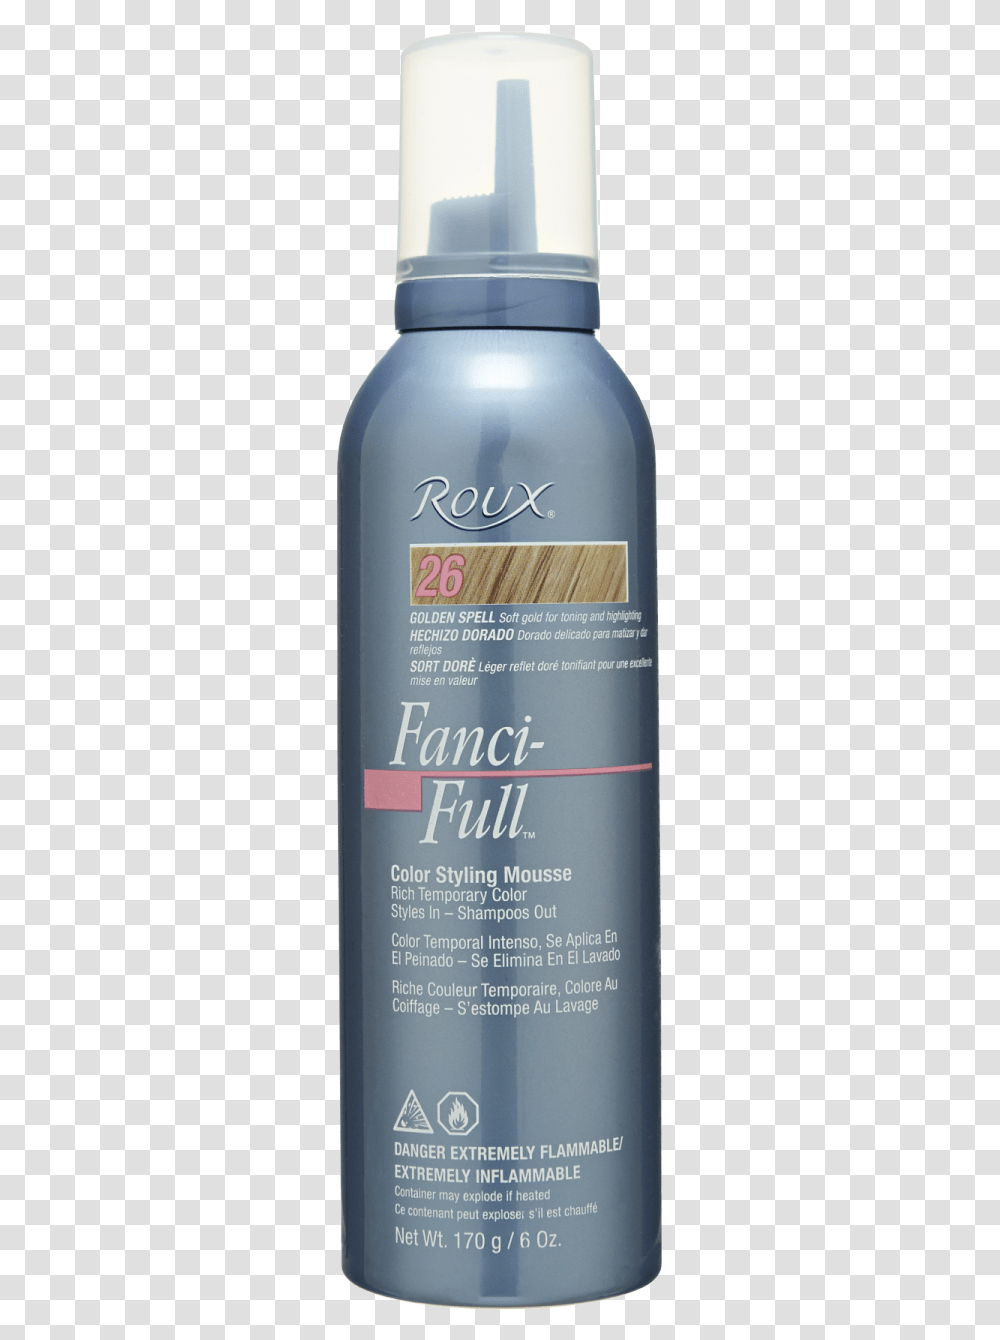 Fanci Full Temporary Hair Color Mousse By Roux Blond, Alcohol, Beverage, Tin, Aluminium Transparent Png